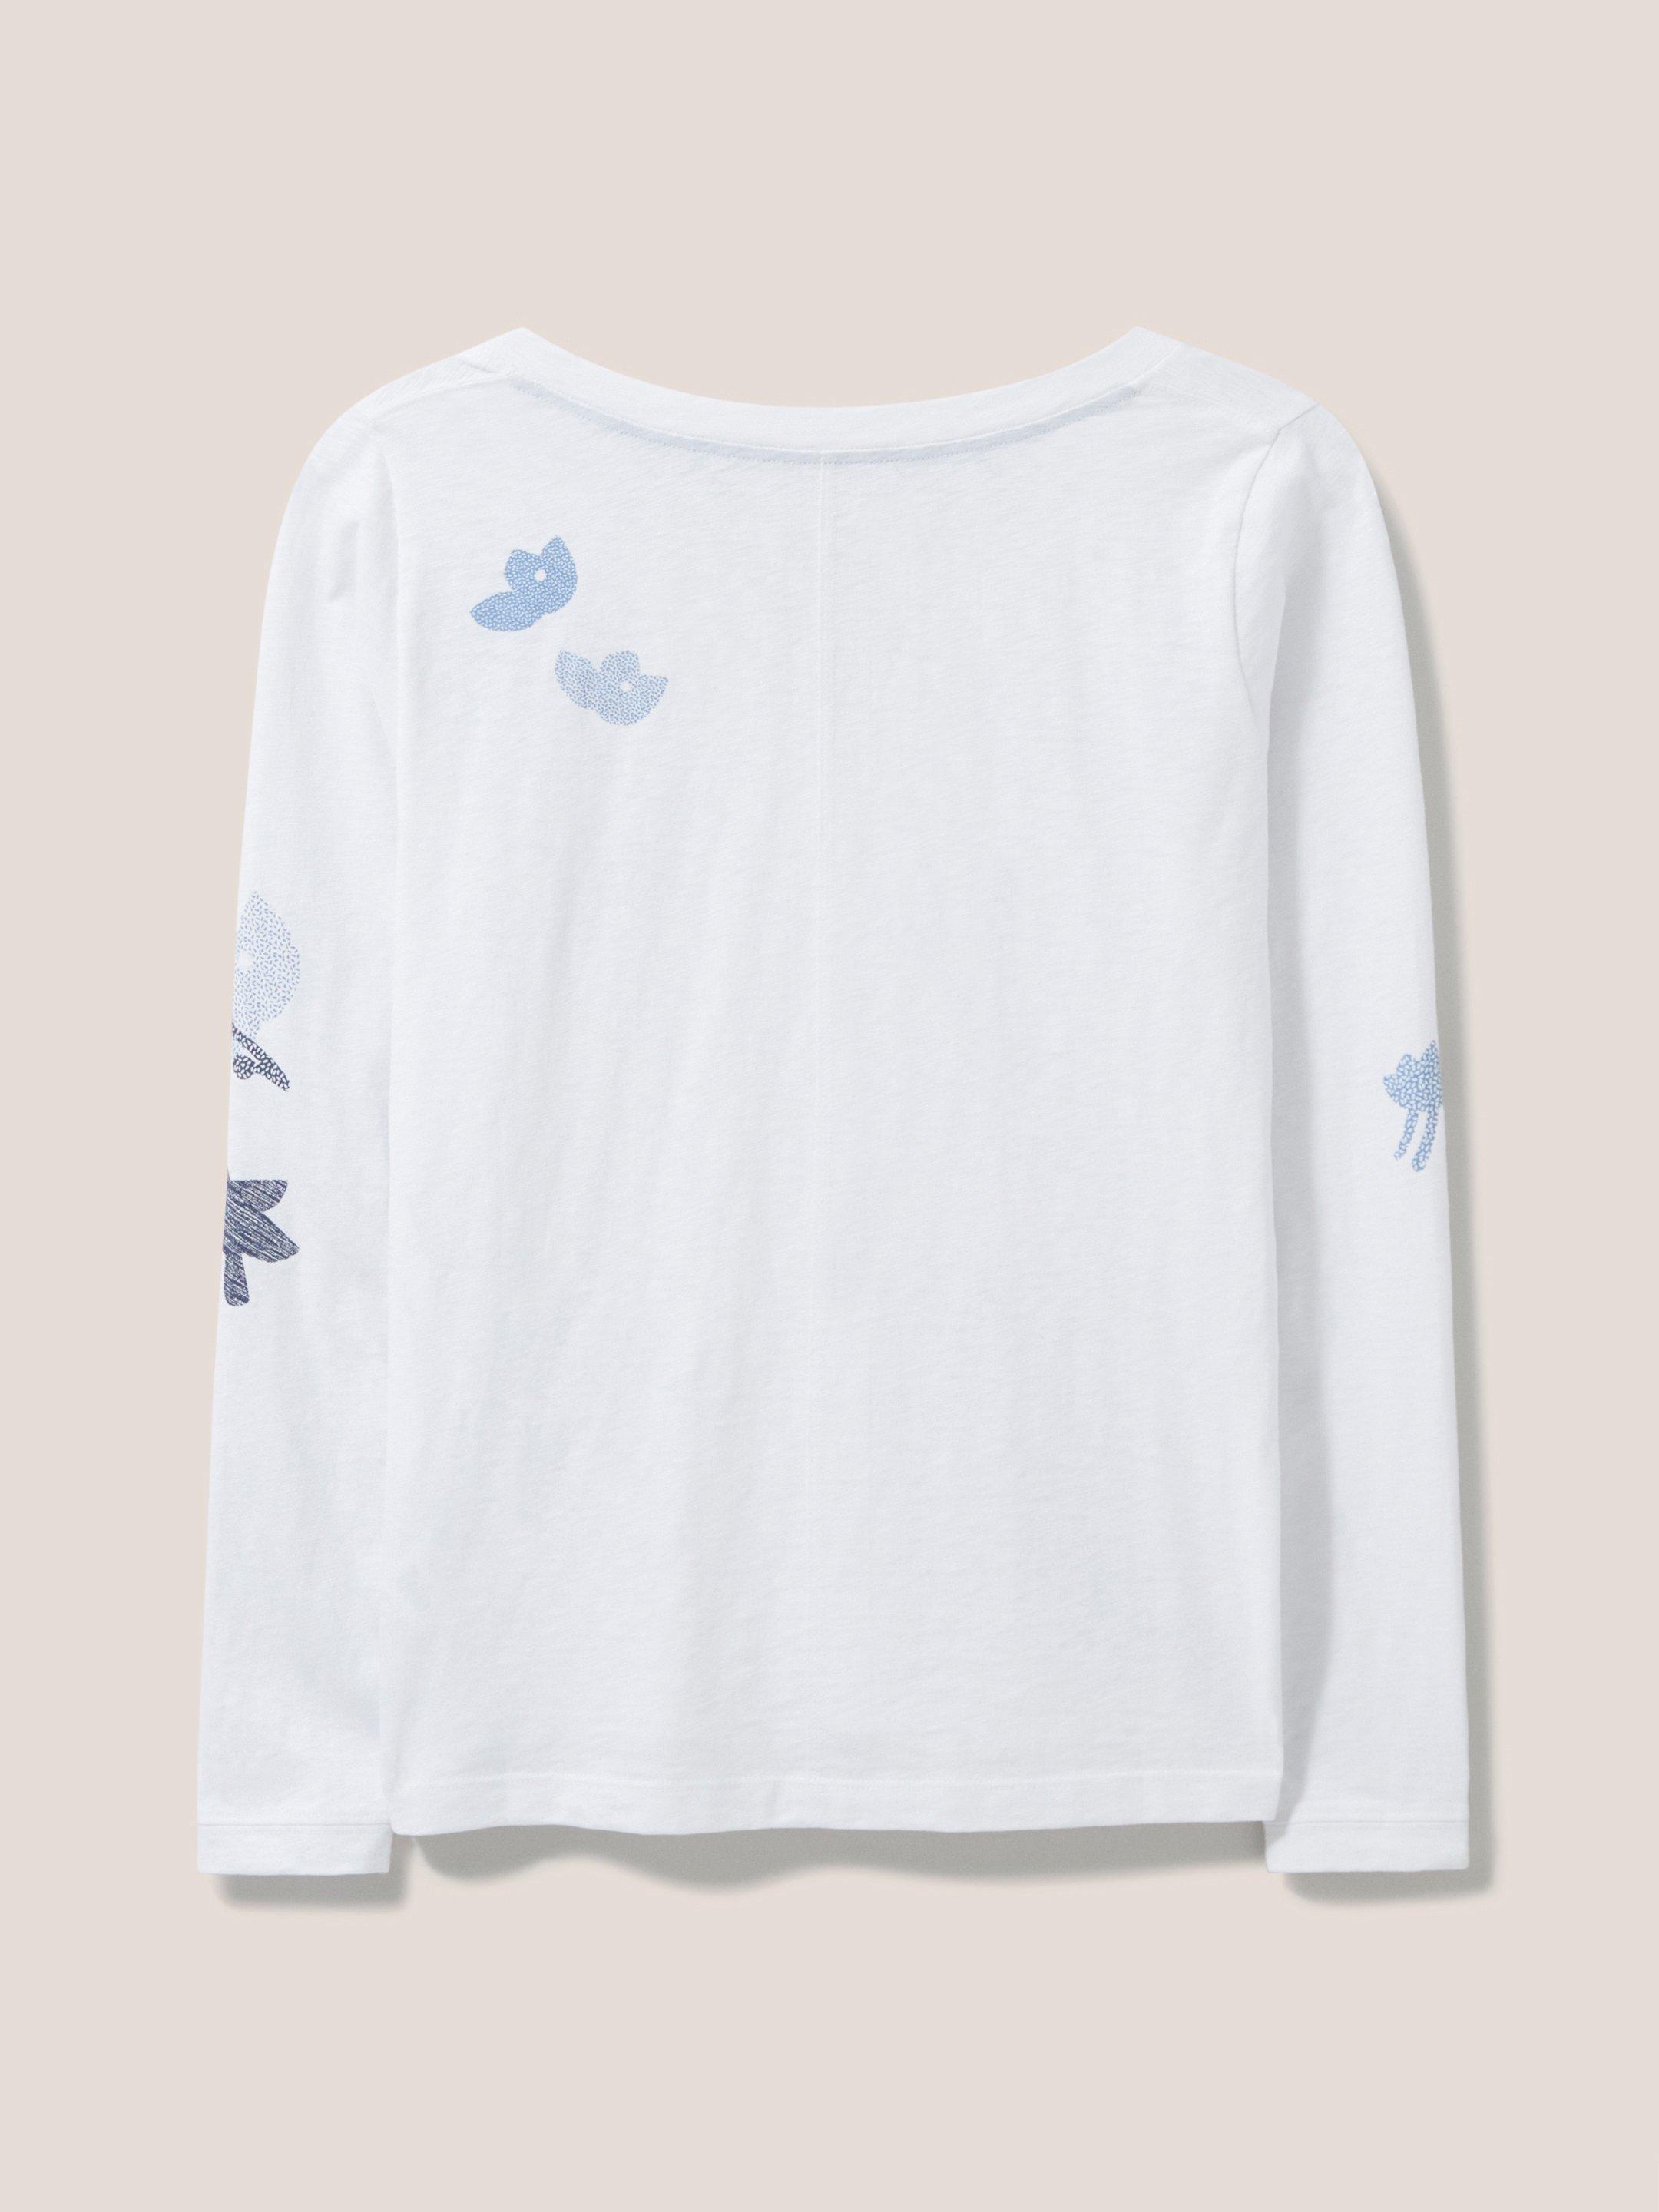 Nelly LS Tee in WHITE PR - FLAT BACK